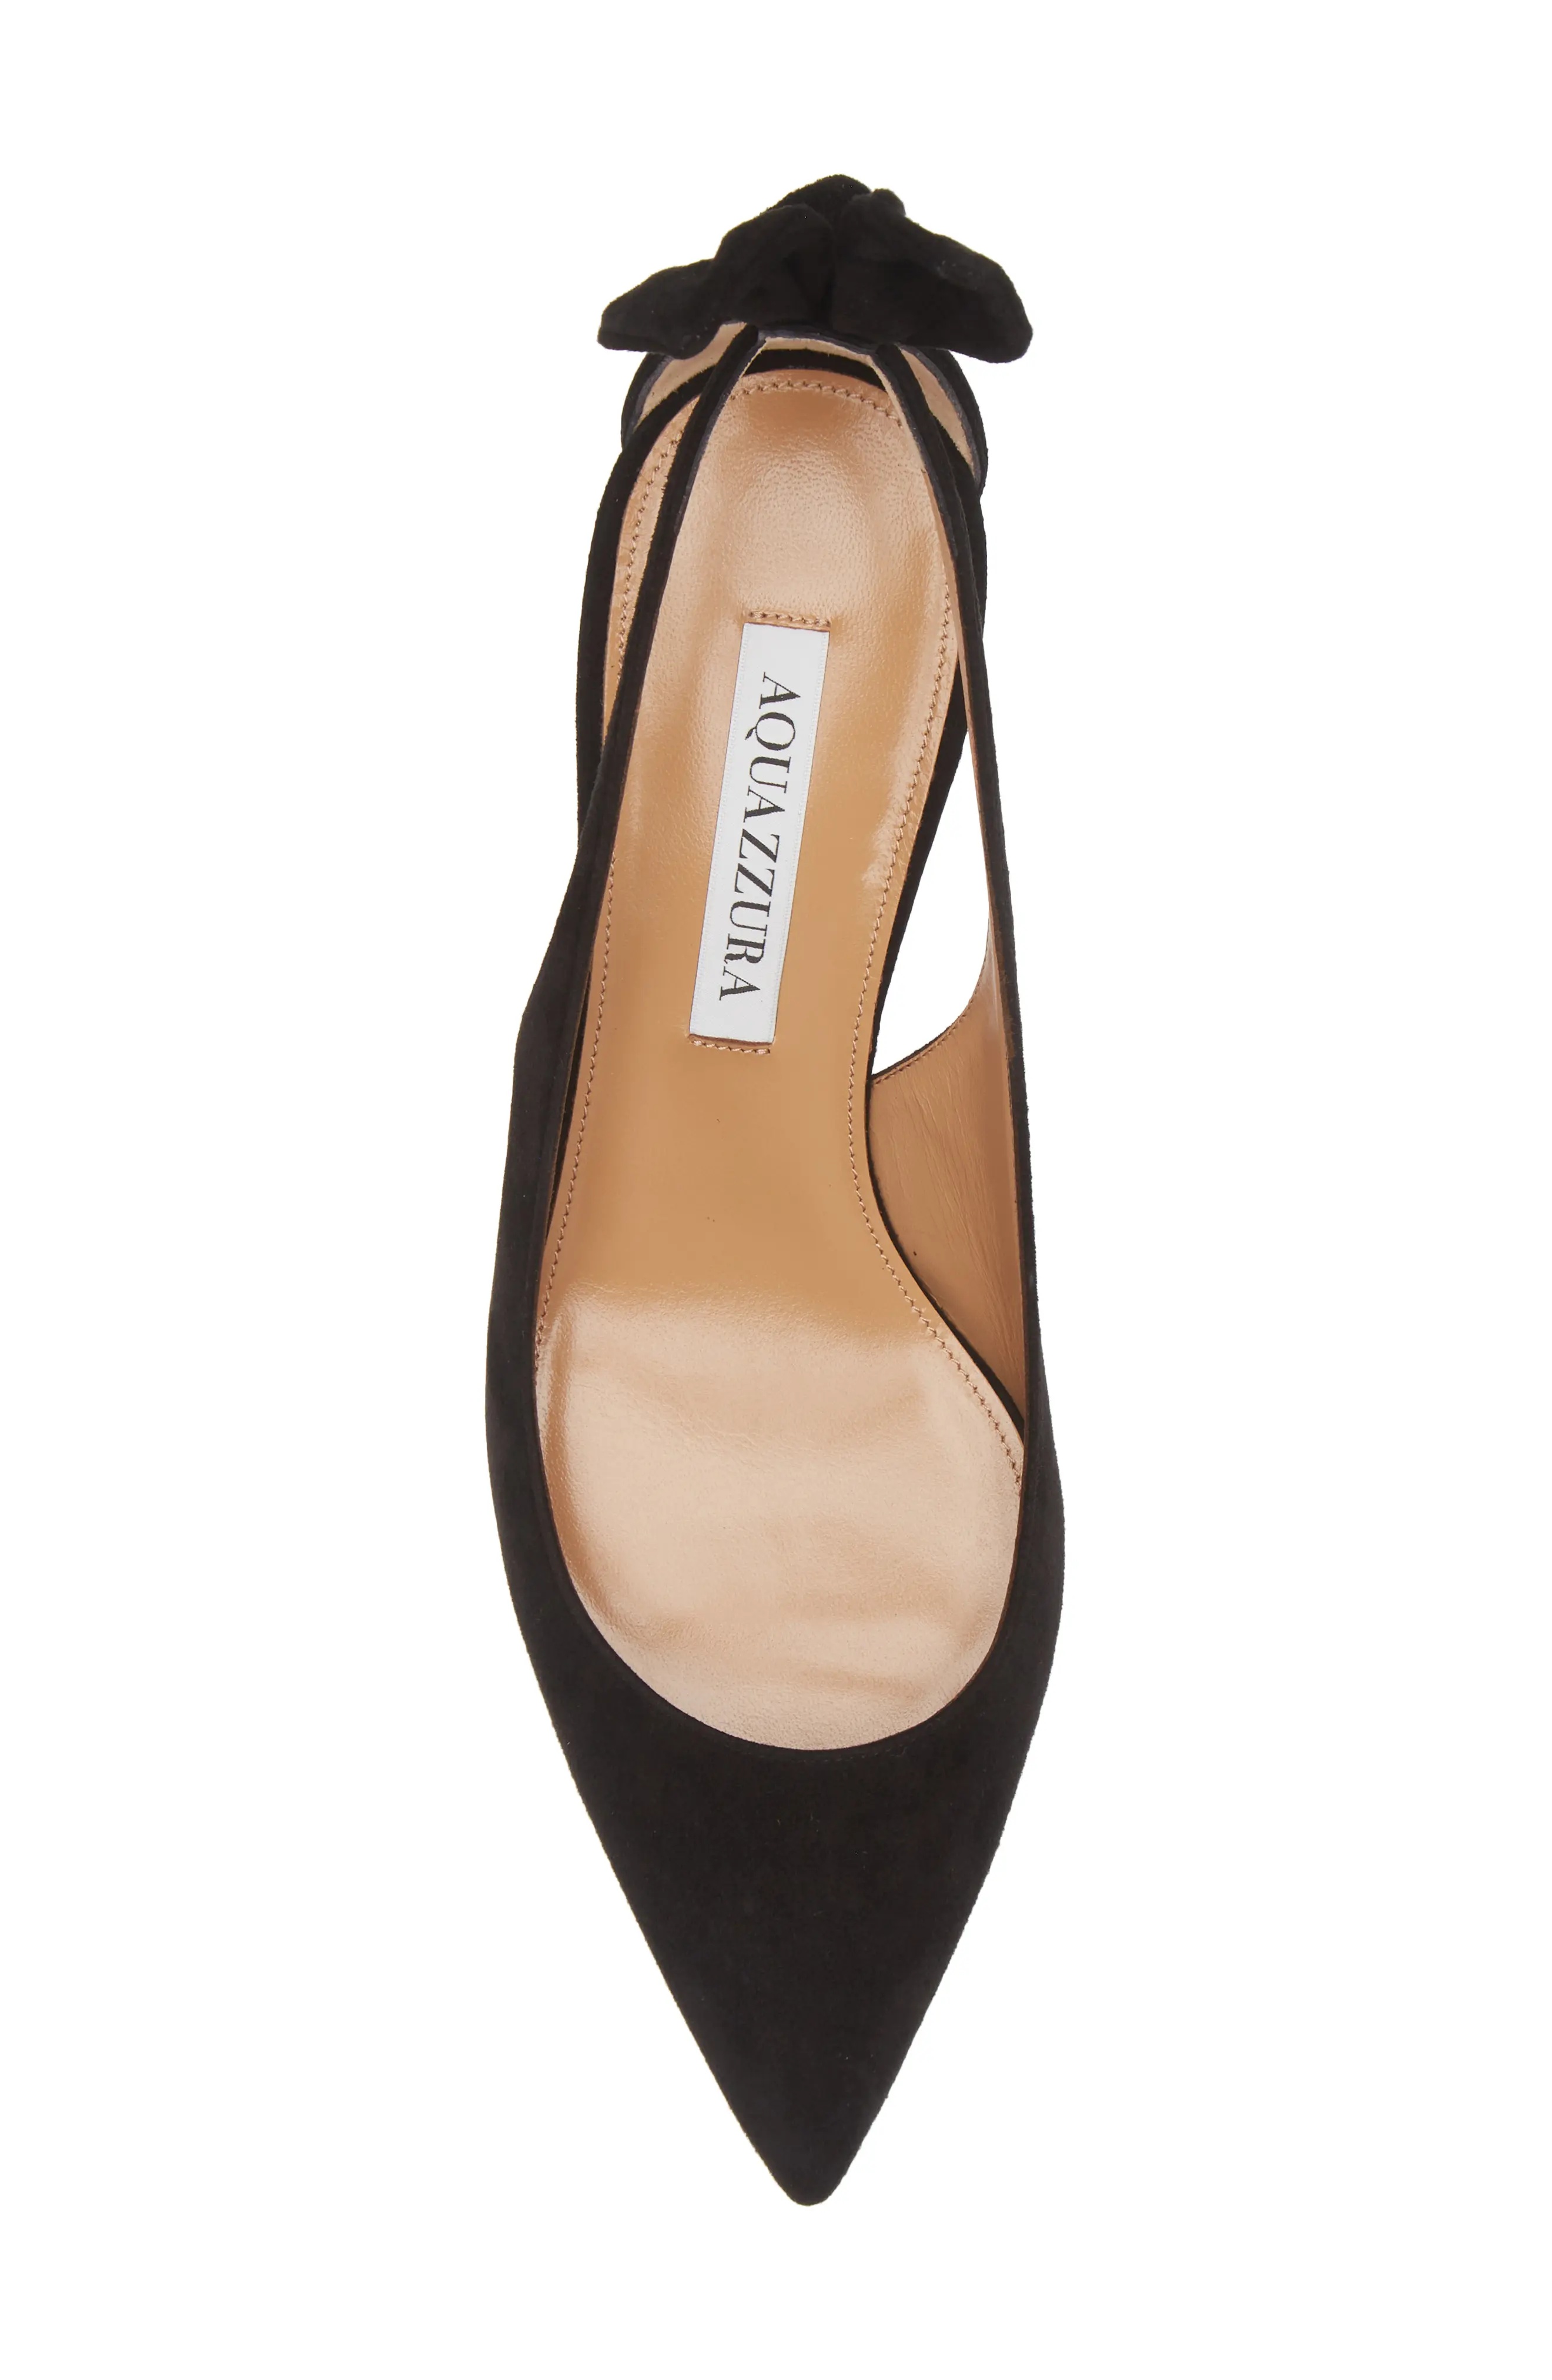 Bow Tie Pointed Toe Pump - 5